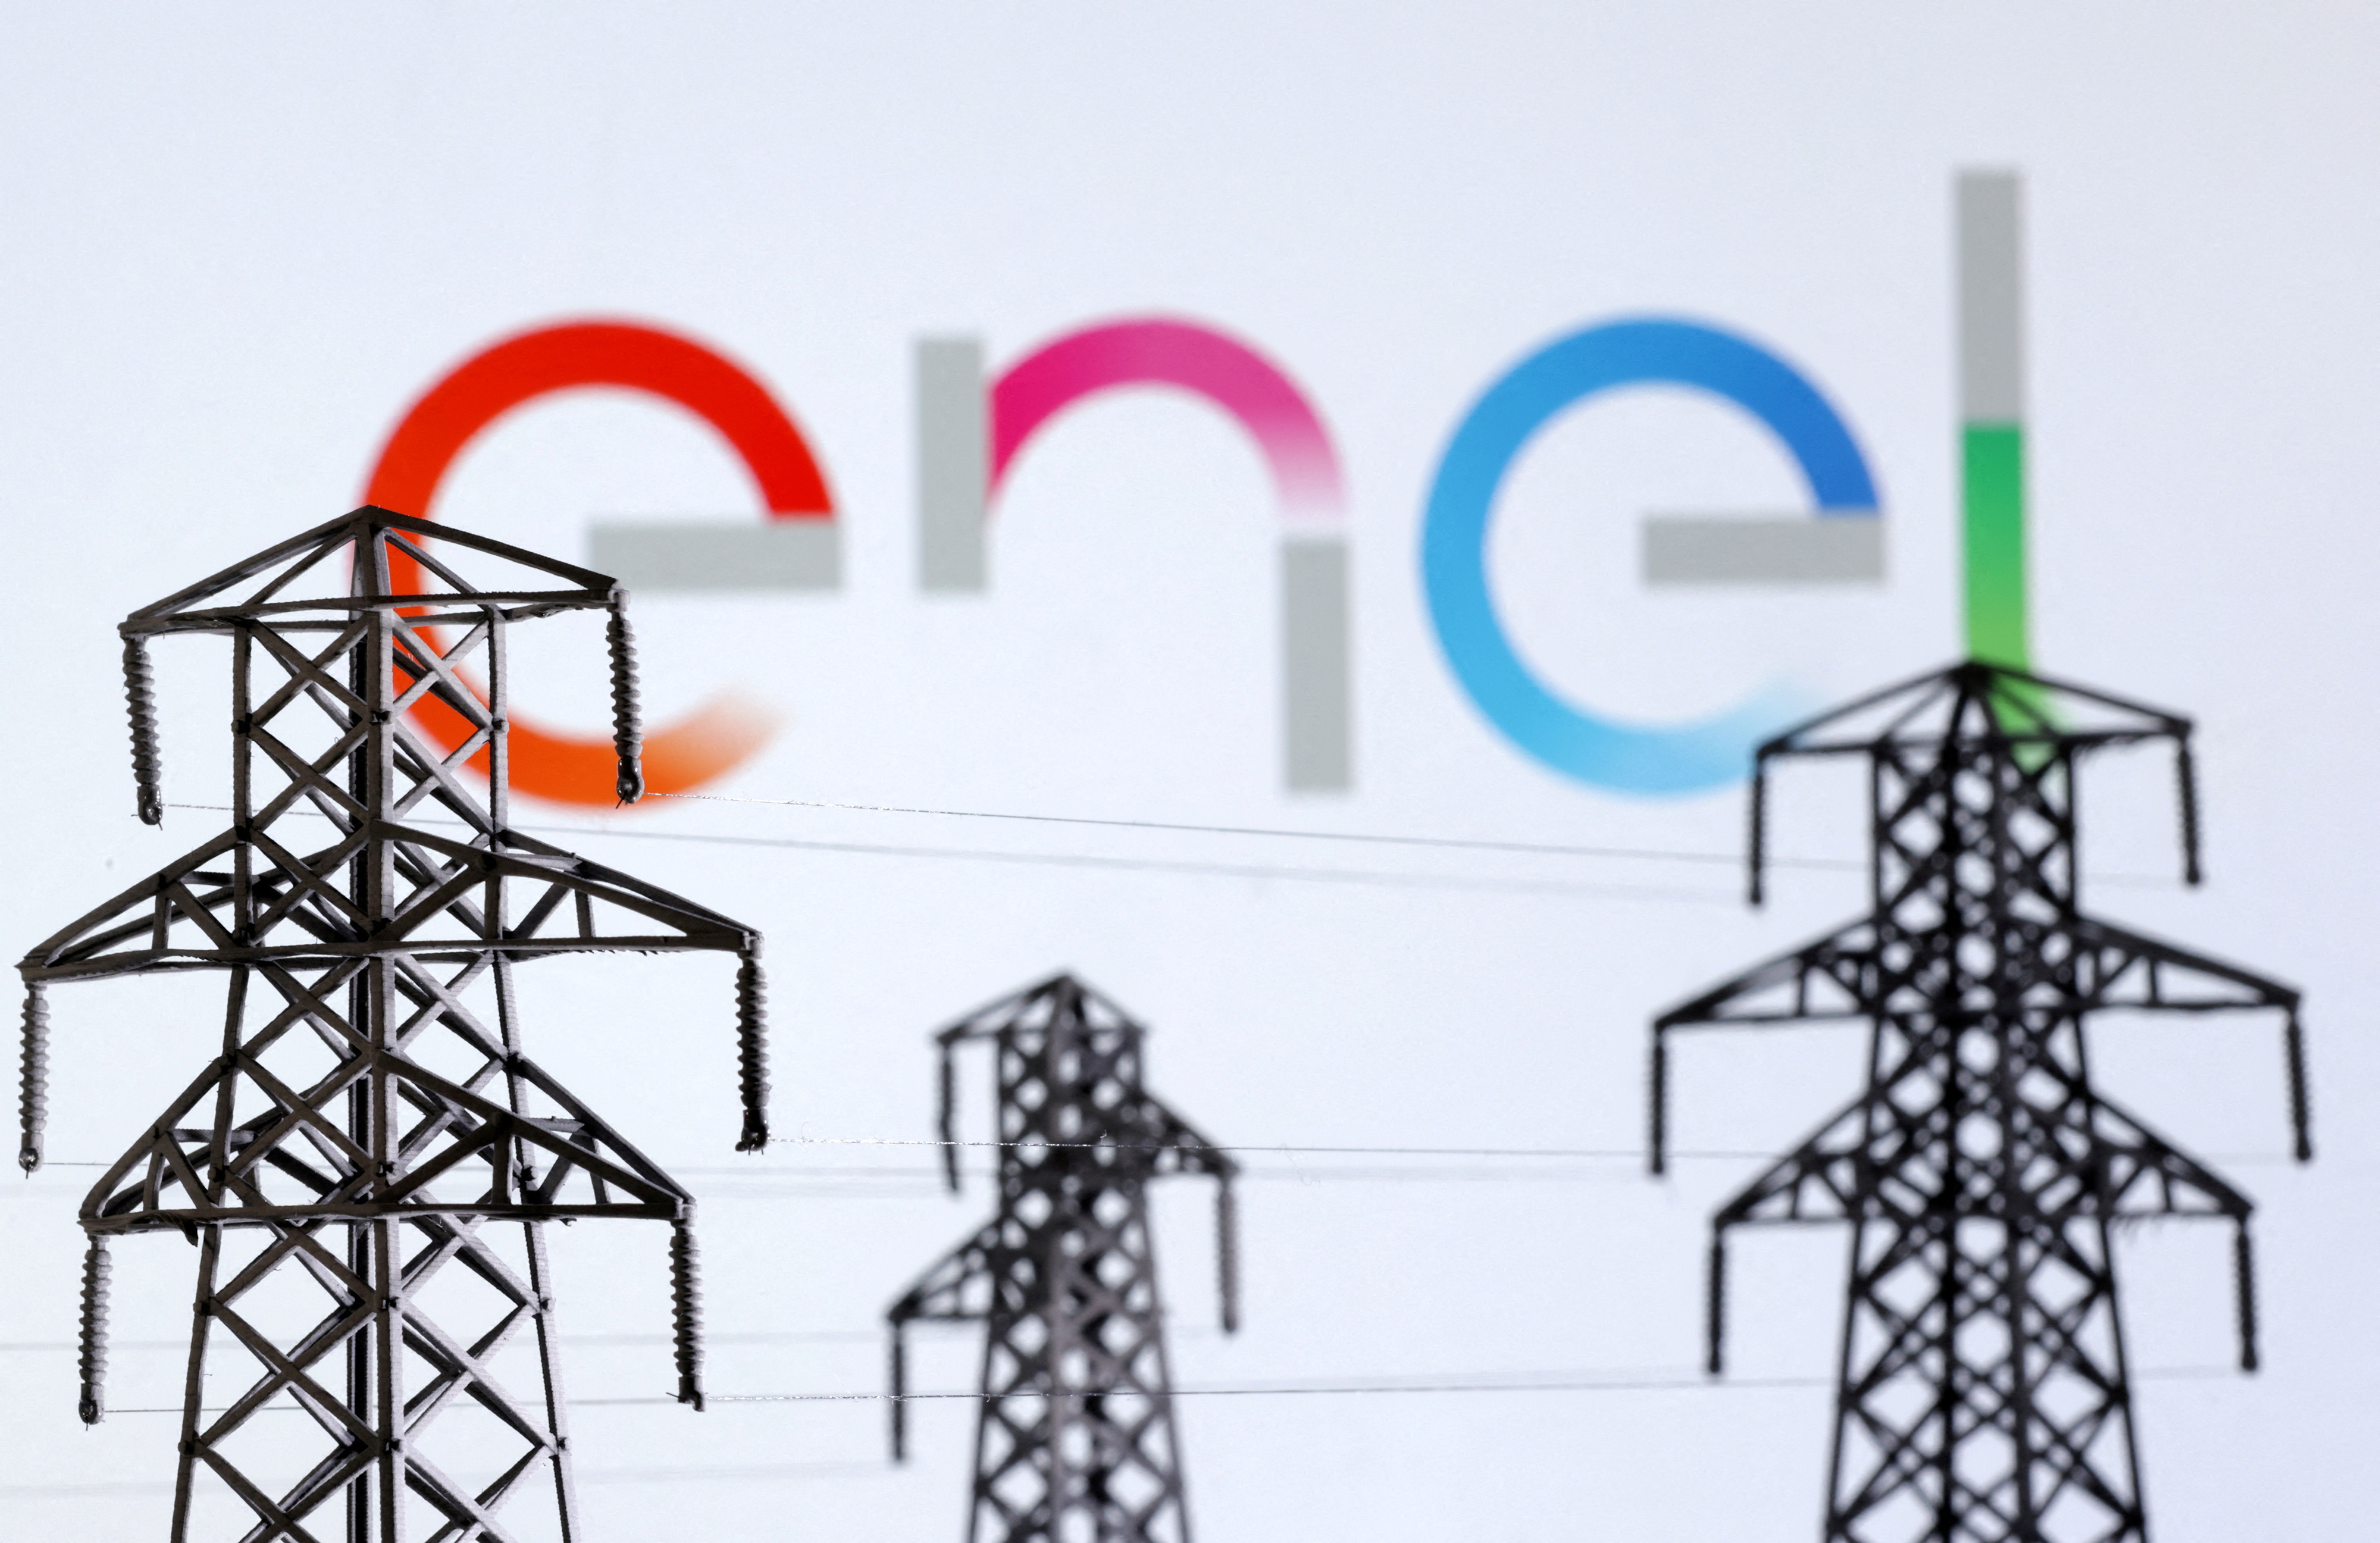 Enel Group - Together, we will change the way the world uses energy.  EnerNOC, a US-based provider of smart energy management services, is now a  part of Enel Group's Global e-Solutions. We